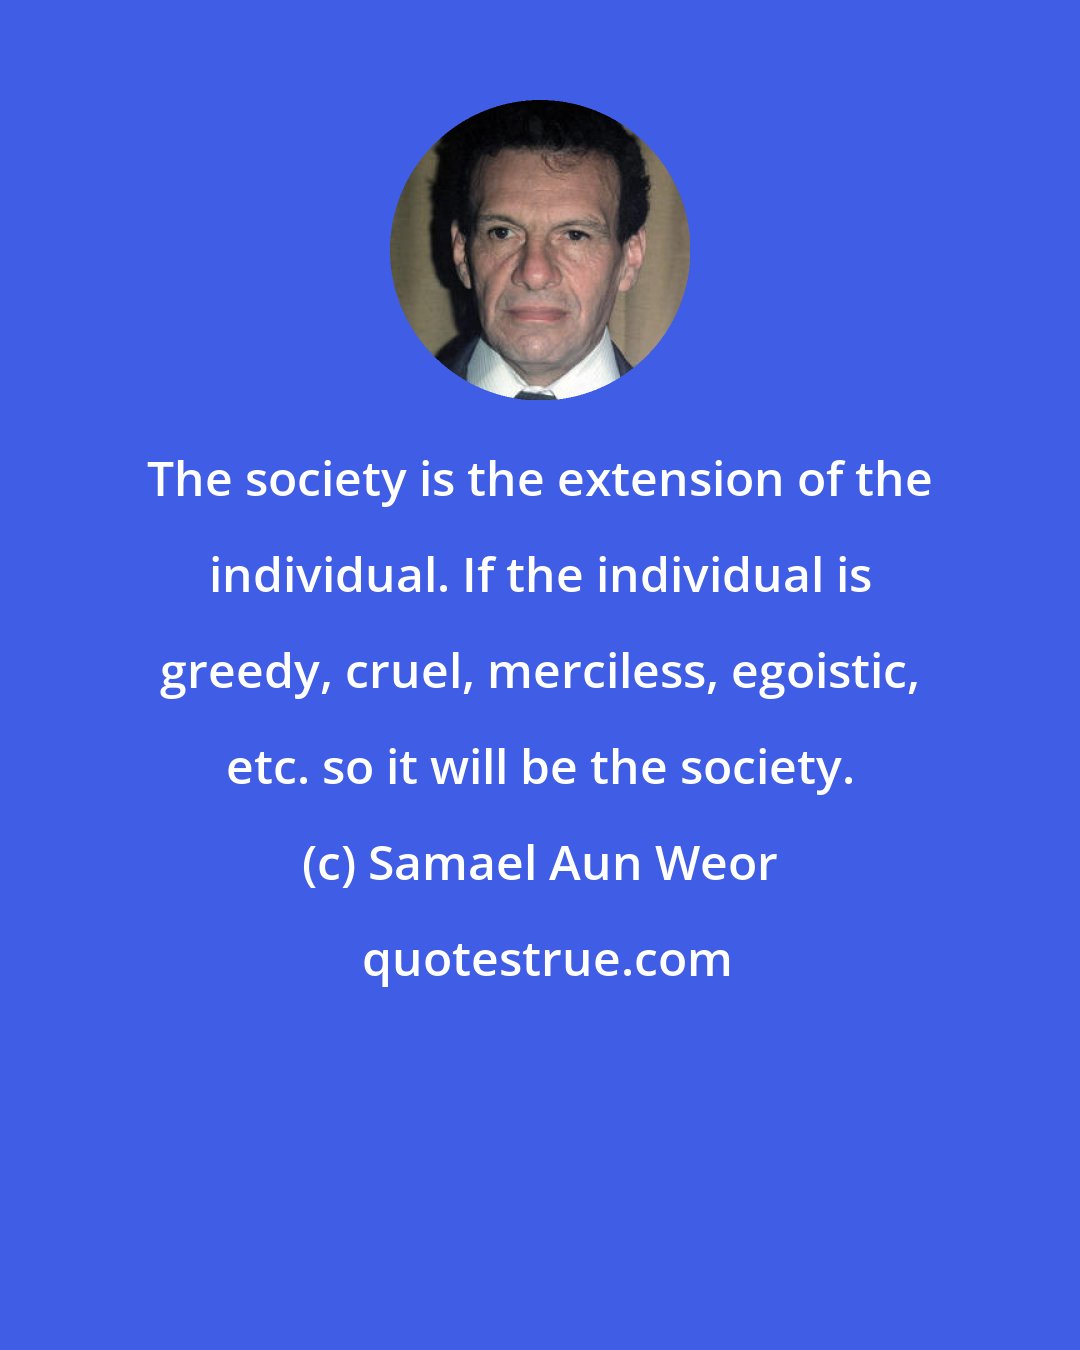 Samael Aun Weor: The society is the extension of the individual. If the individual is greedy, cruel, merciless, egoistic, etc. so it will be the society.